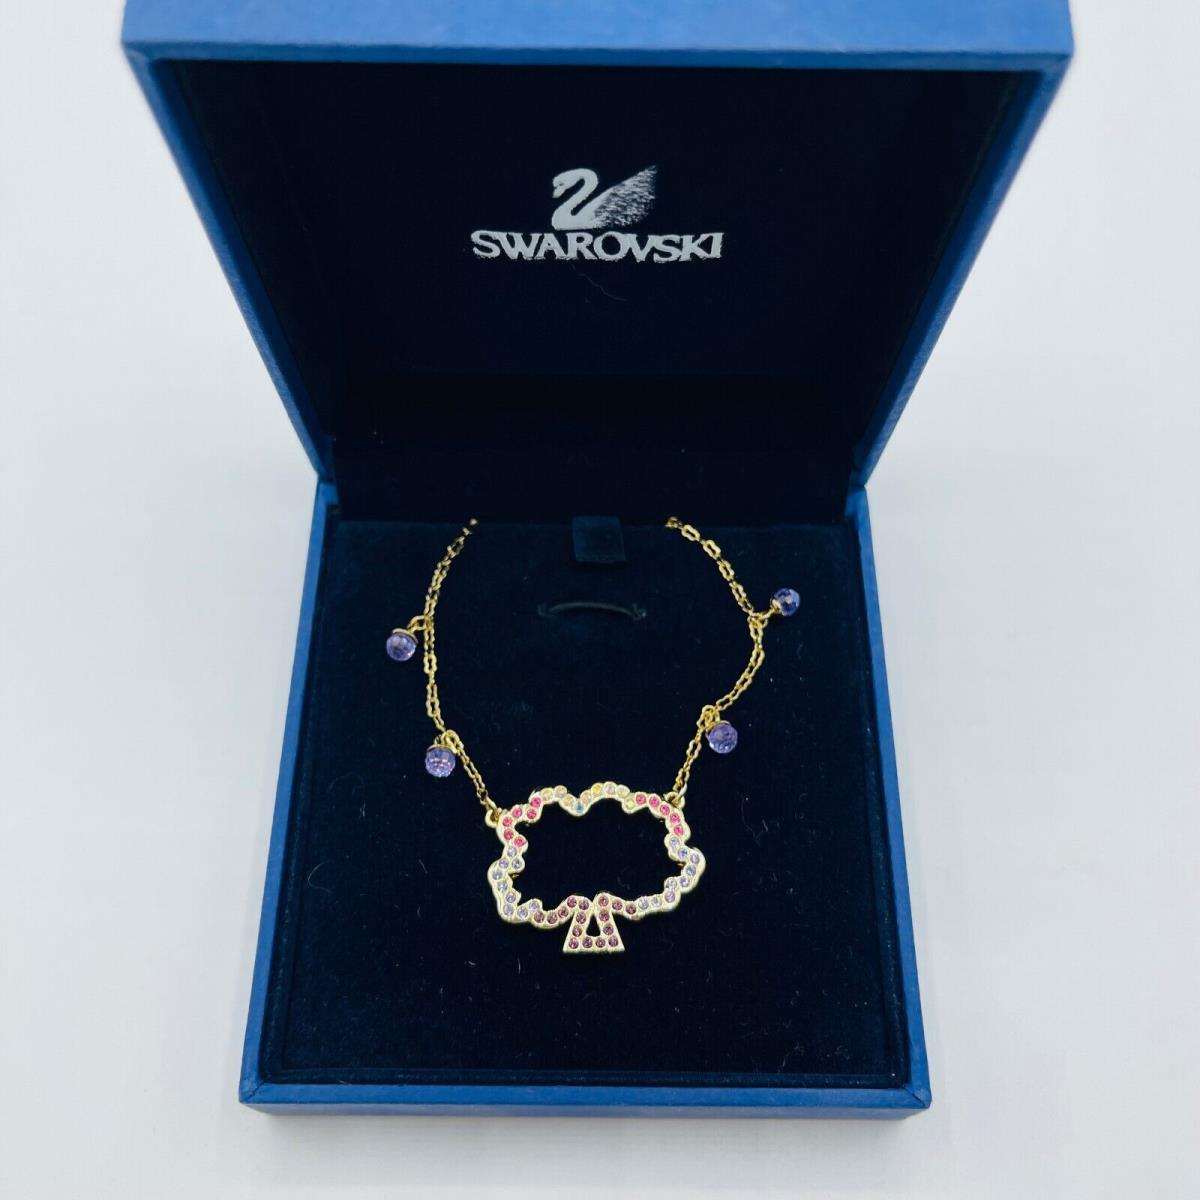 Swarovski Gold Jeweled Pink and White Tree Necklace with Chain 993774